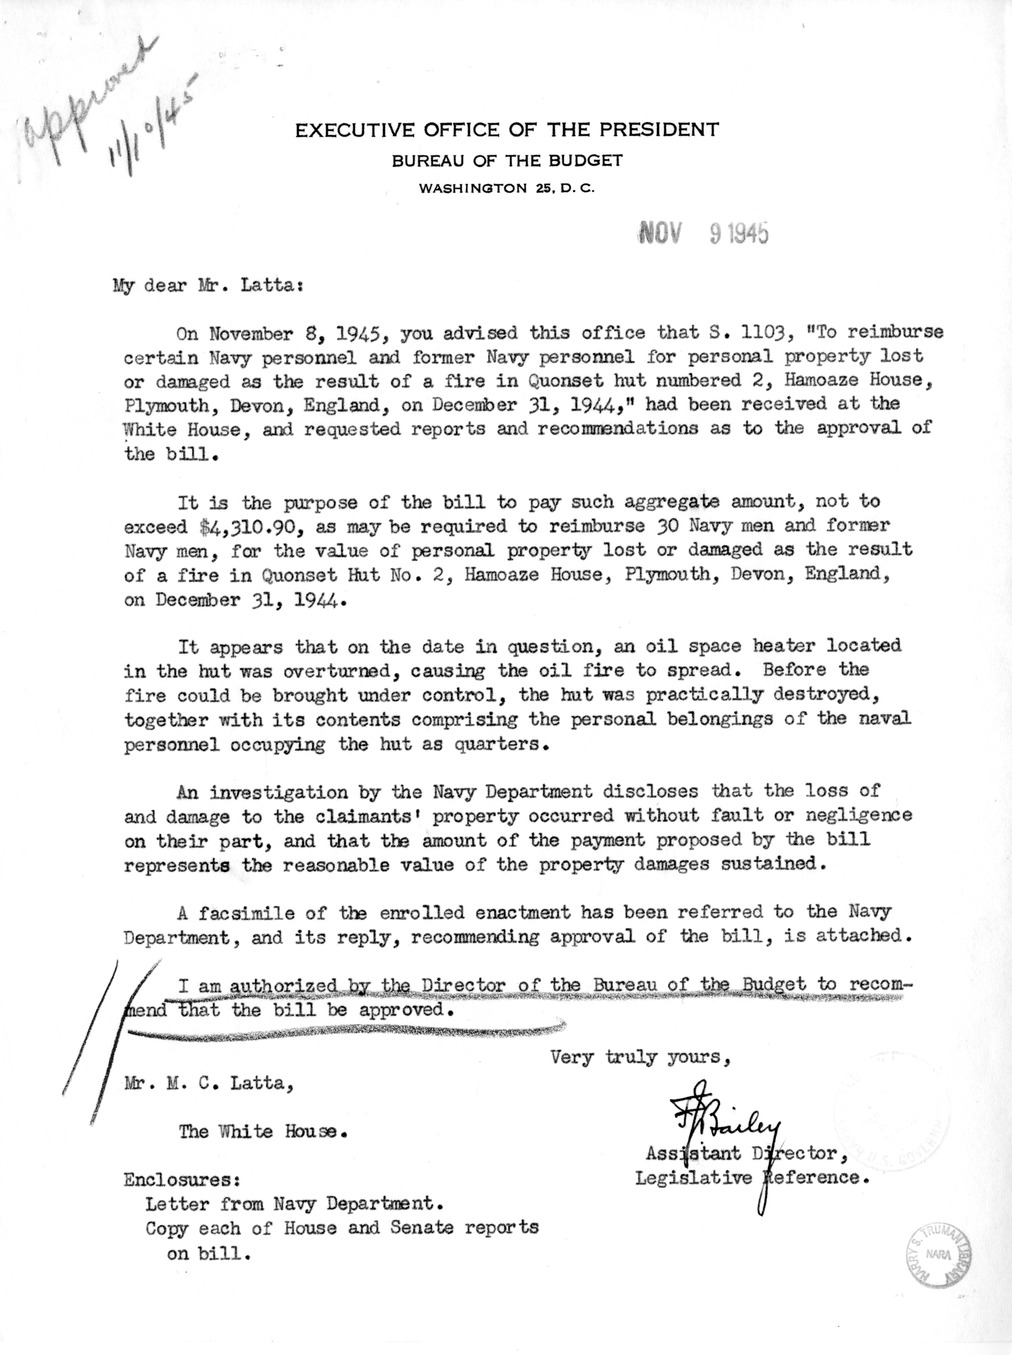 Memorandum from Frederick J. Bailey to M. C. Latta, S. 1103, To Reimburse Certain Navy Personnel and Former Navy Personnel for Personal Property Lost or Damaged as a Result of a Fire in Quonset Hut Numbered 2, Hamoaze House, Plymouth, Devon, England, on December 31, 1944, with Attachments